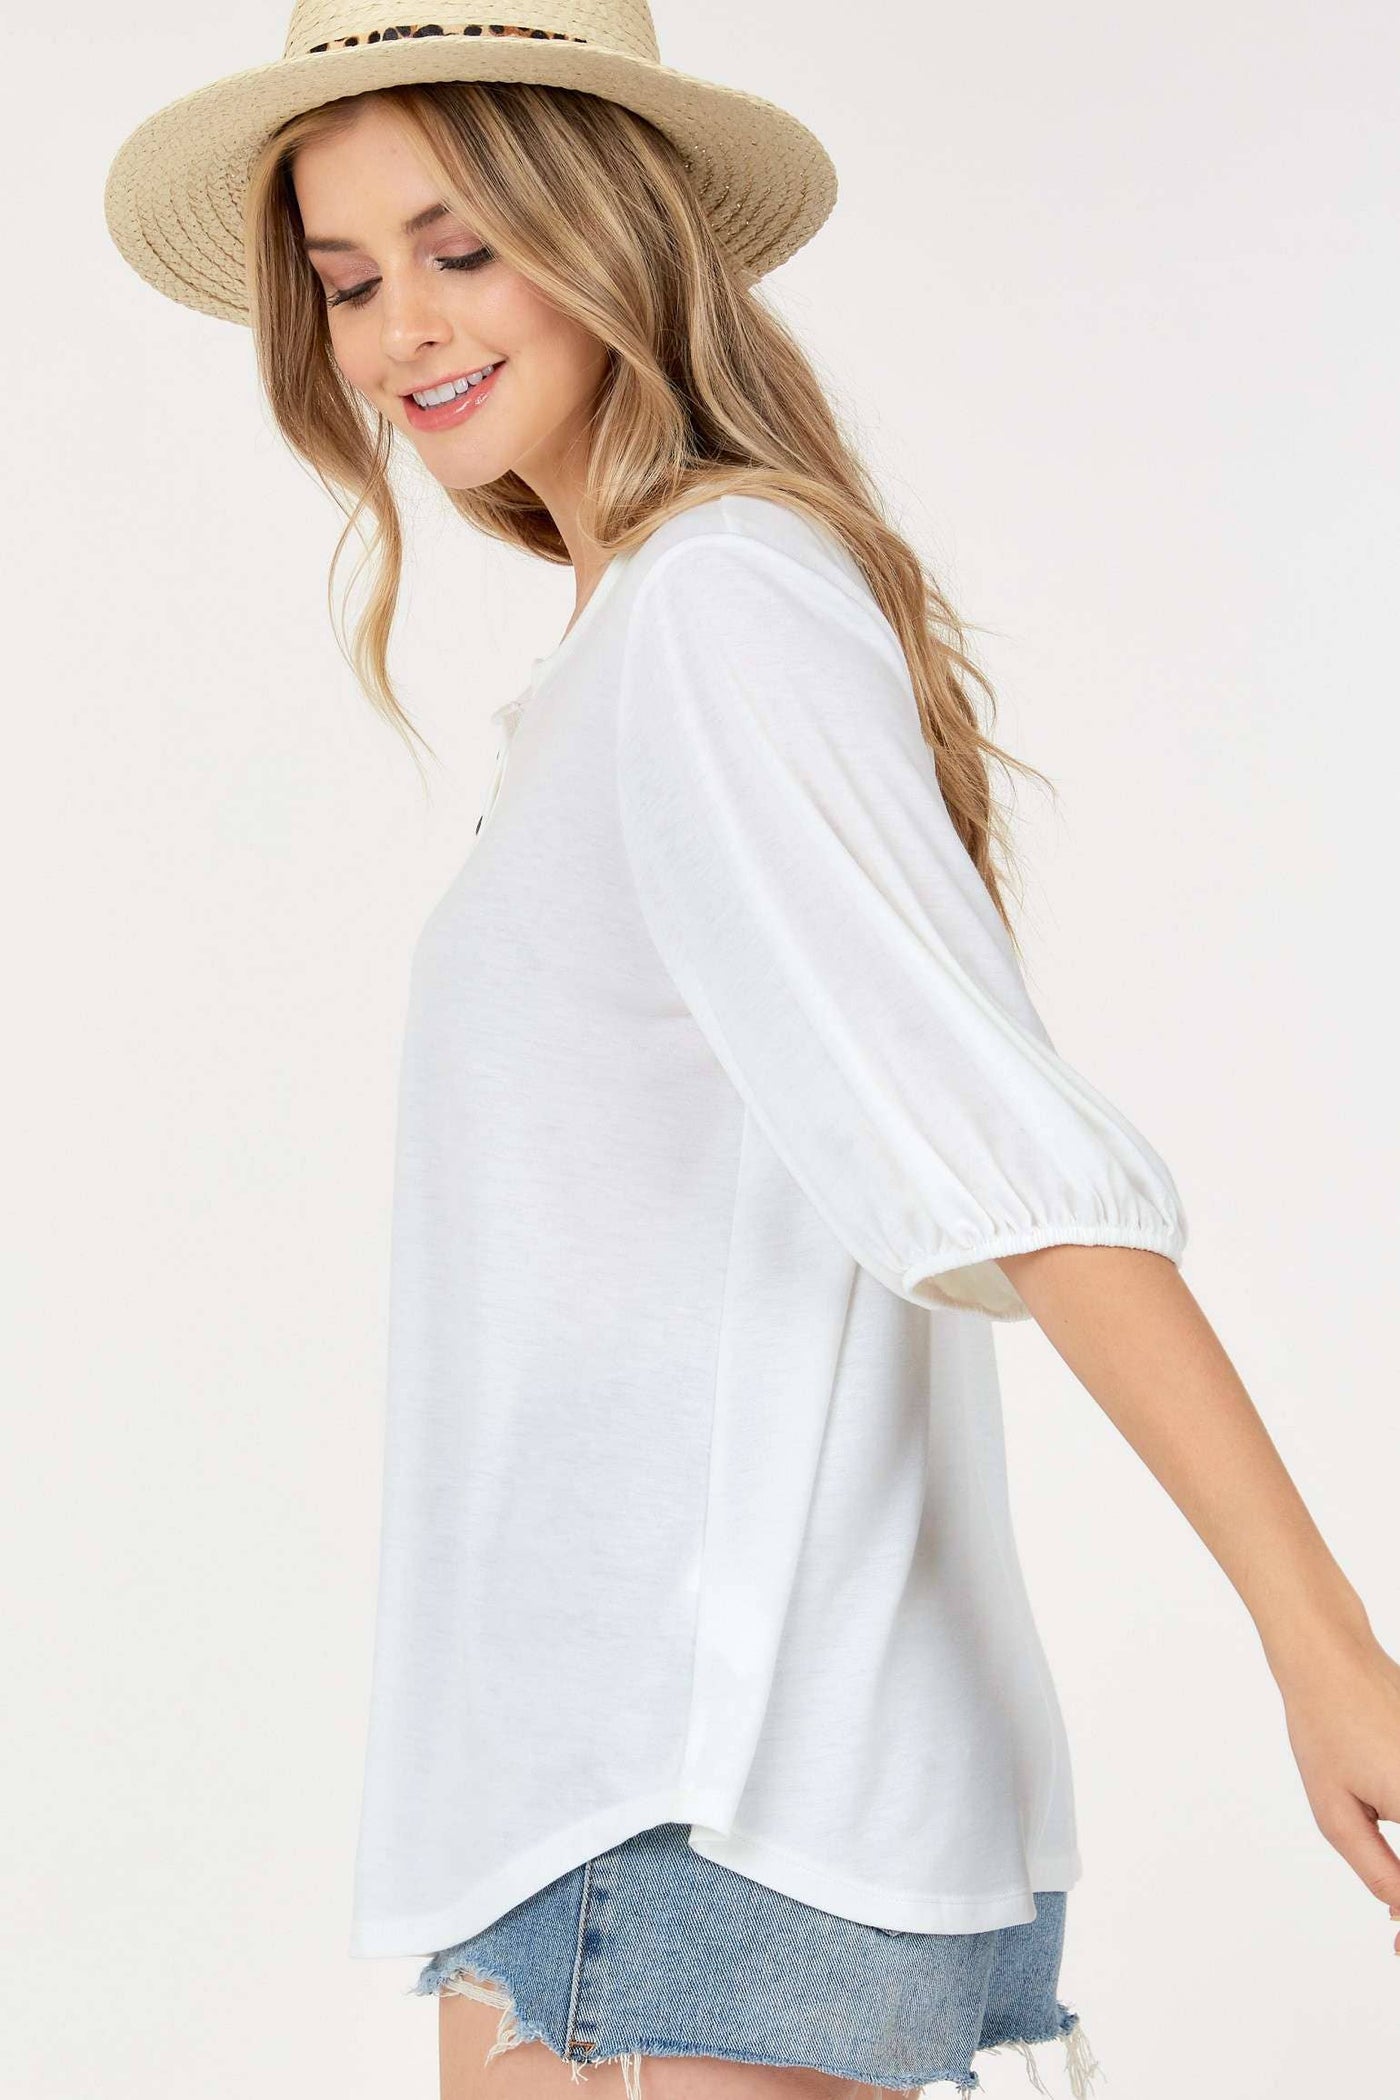 Short Sleeve Round neck with button ups and banded arms